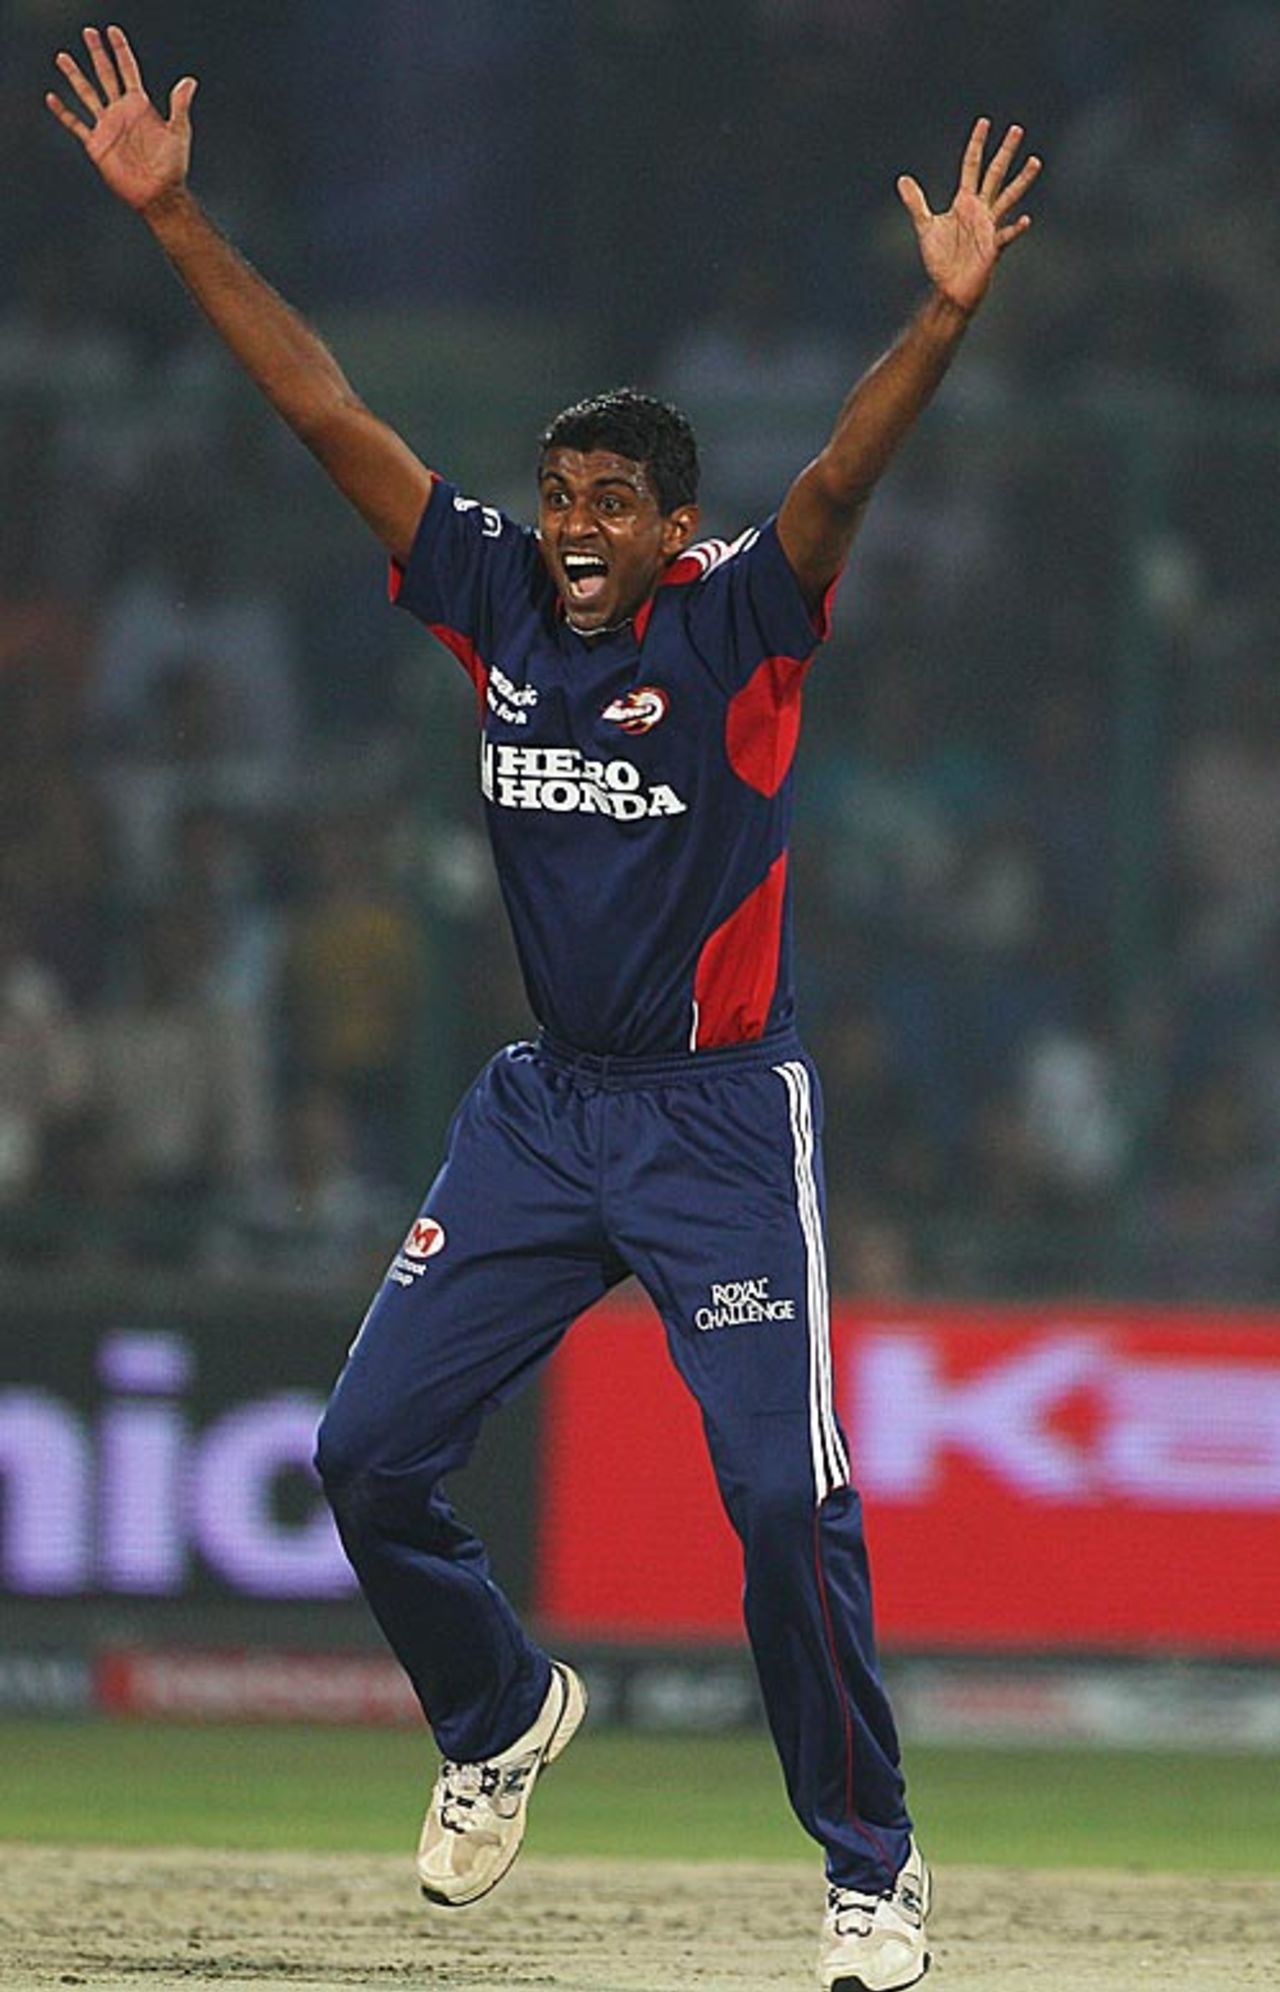 Farveez Maharoof nipped out two wickets in his first over, Delhi Daredevils v Rajasthan Royals, IPL, Delhi, March 31, 2010